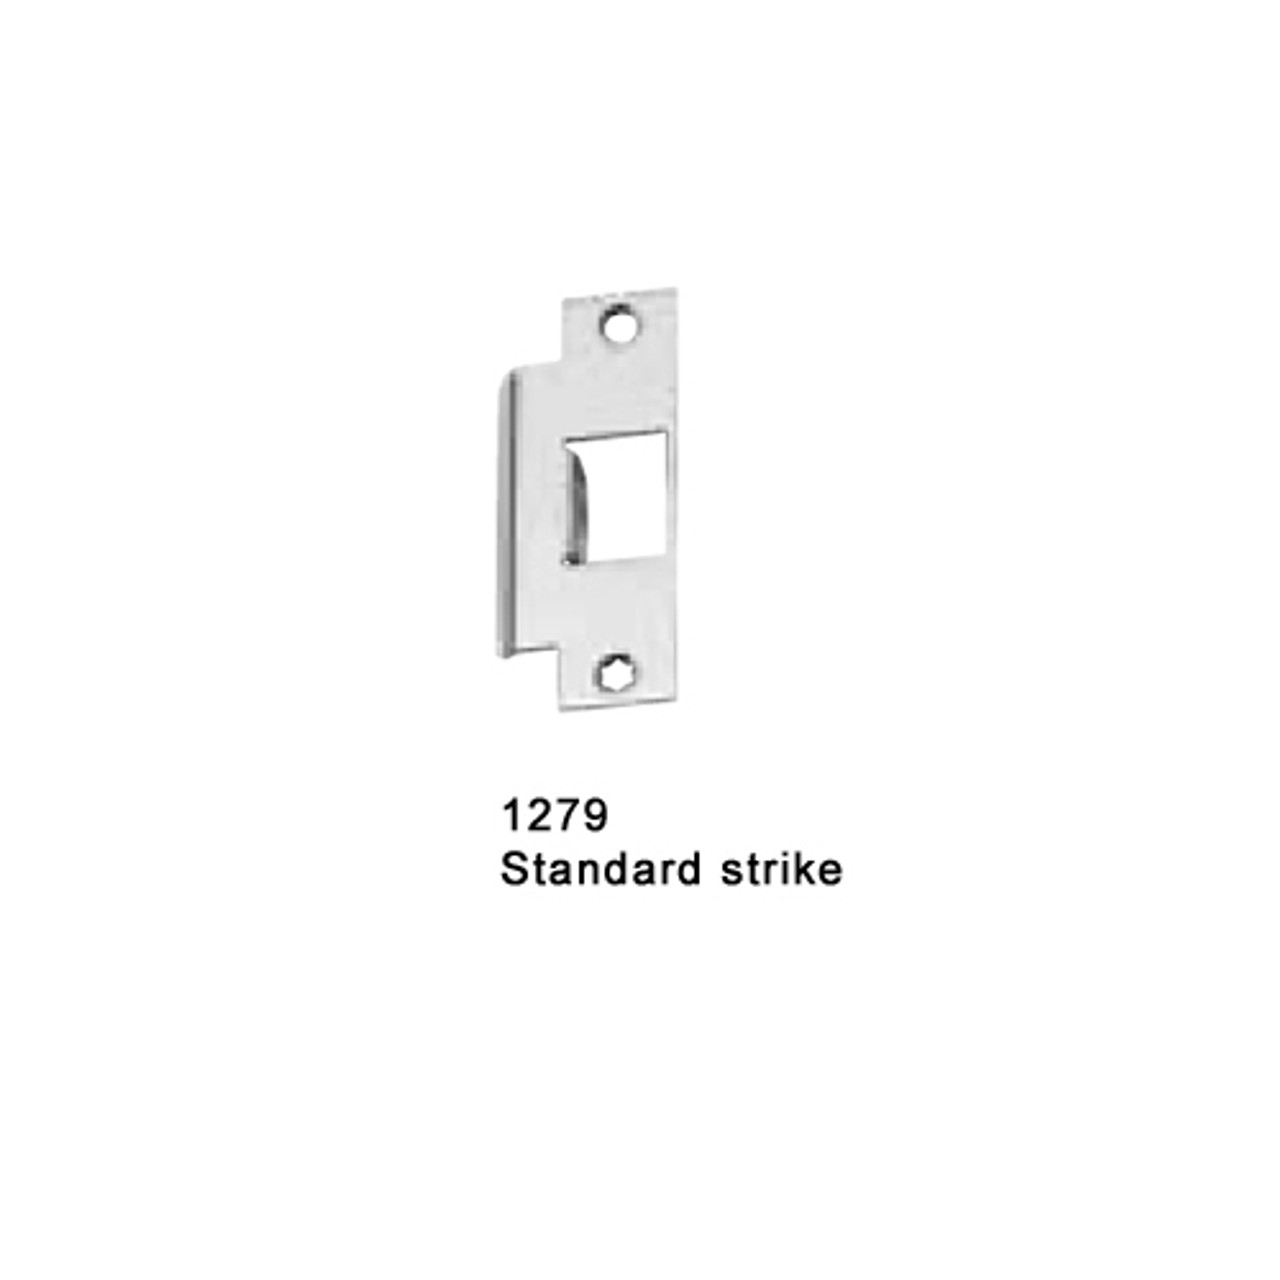 F-25-M-L-BE-Dane-US26-3-RHR Falcon 25 Series Fire Rated Mortise Lock Devices 510L-BE Dane Lever Trim with Blank Escutcheon in Polished Chrome